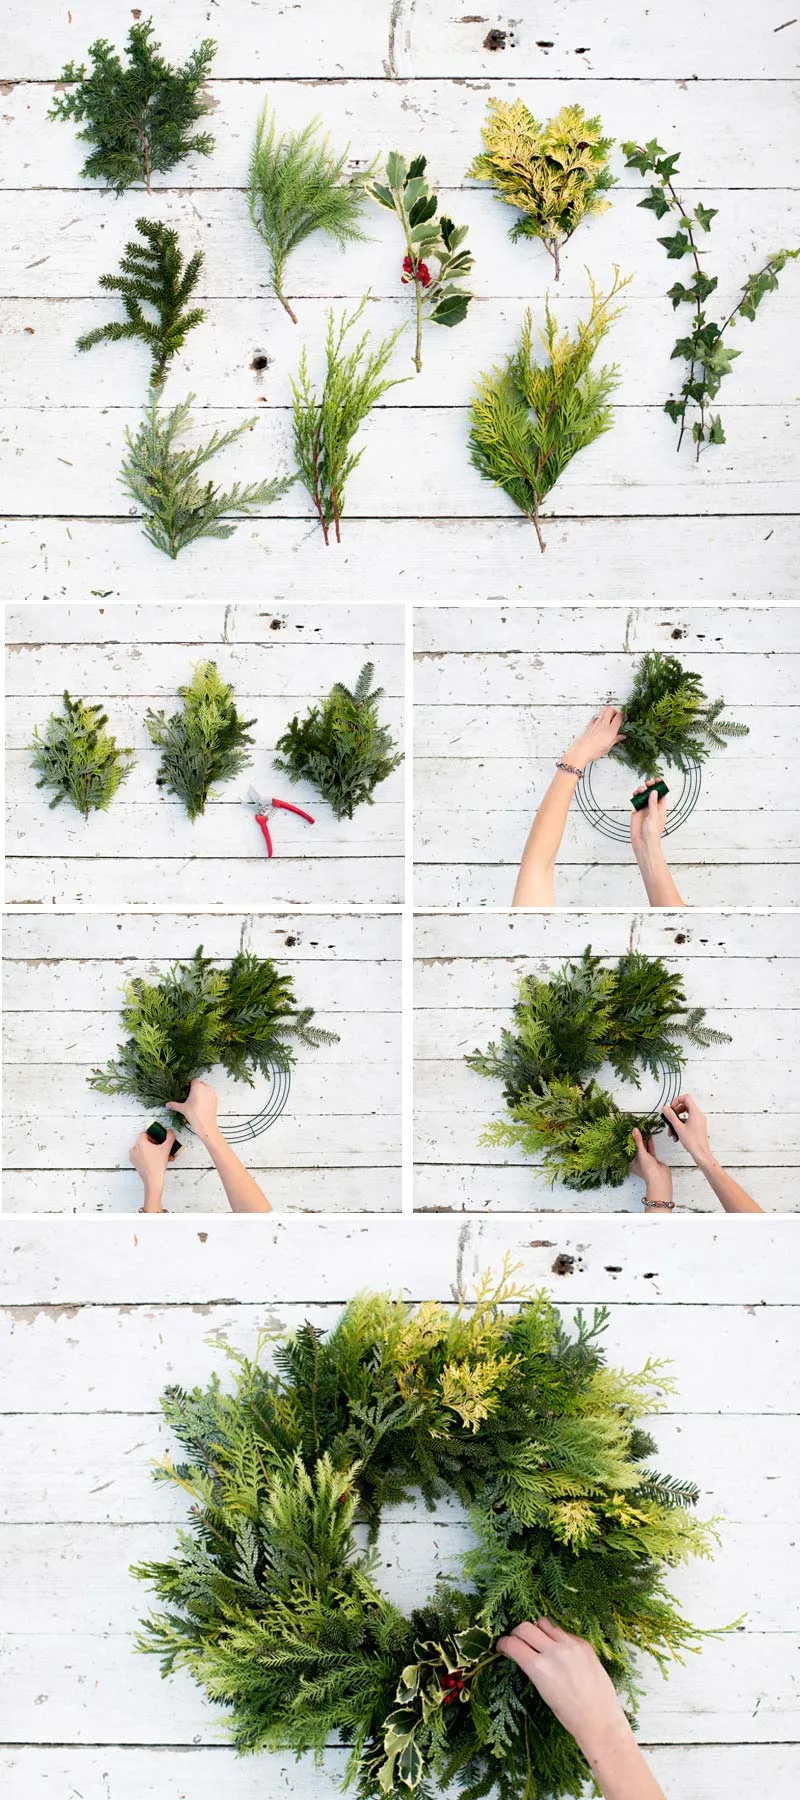 How to decorate a small living room for Christmas - FORAGED EVERGREEN WREATH #smallspaces #tinyhouseliving #smallspaceliving #smallroomdecor #christmasdecorideas #DIYChristmaswreath